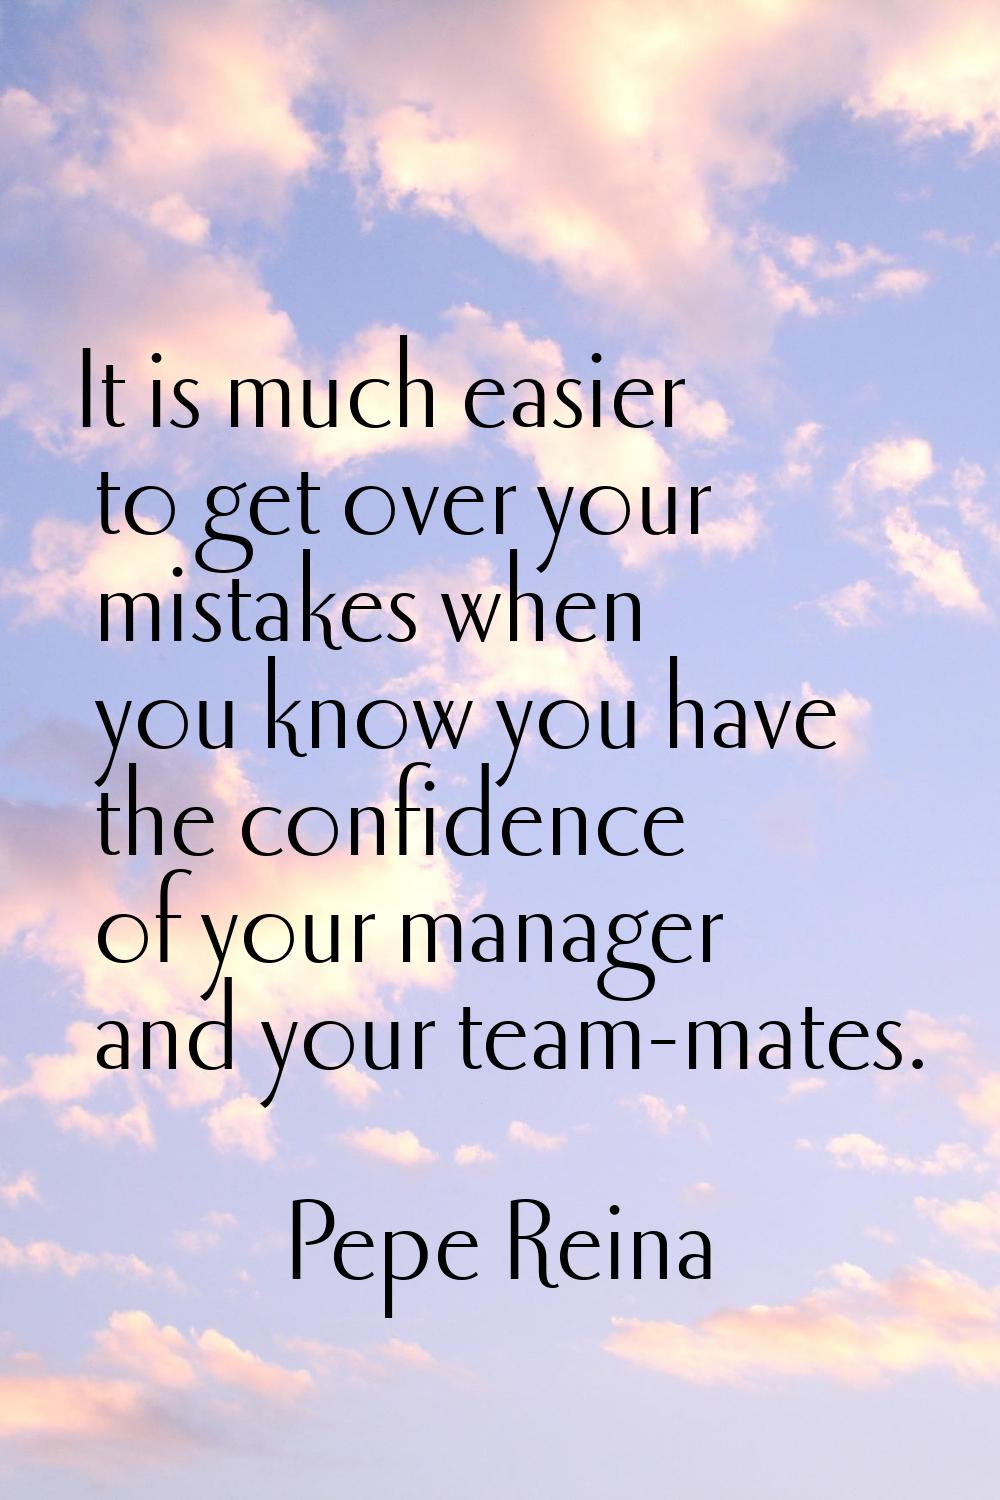 It is much easier to get over your mistakes when you know you have the confidence of your manager a